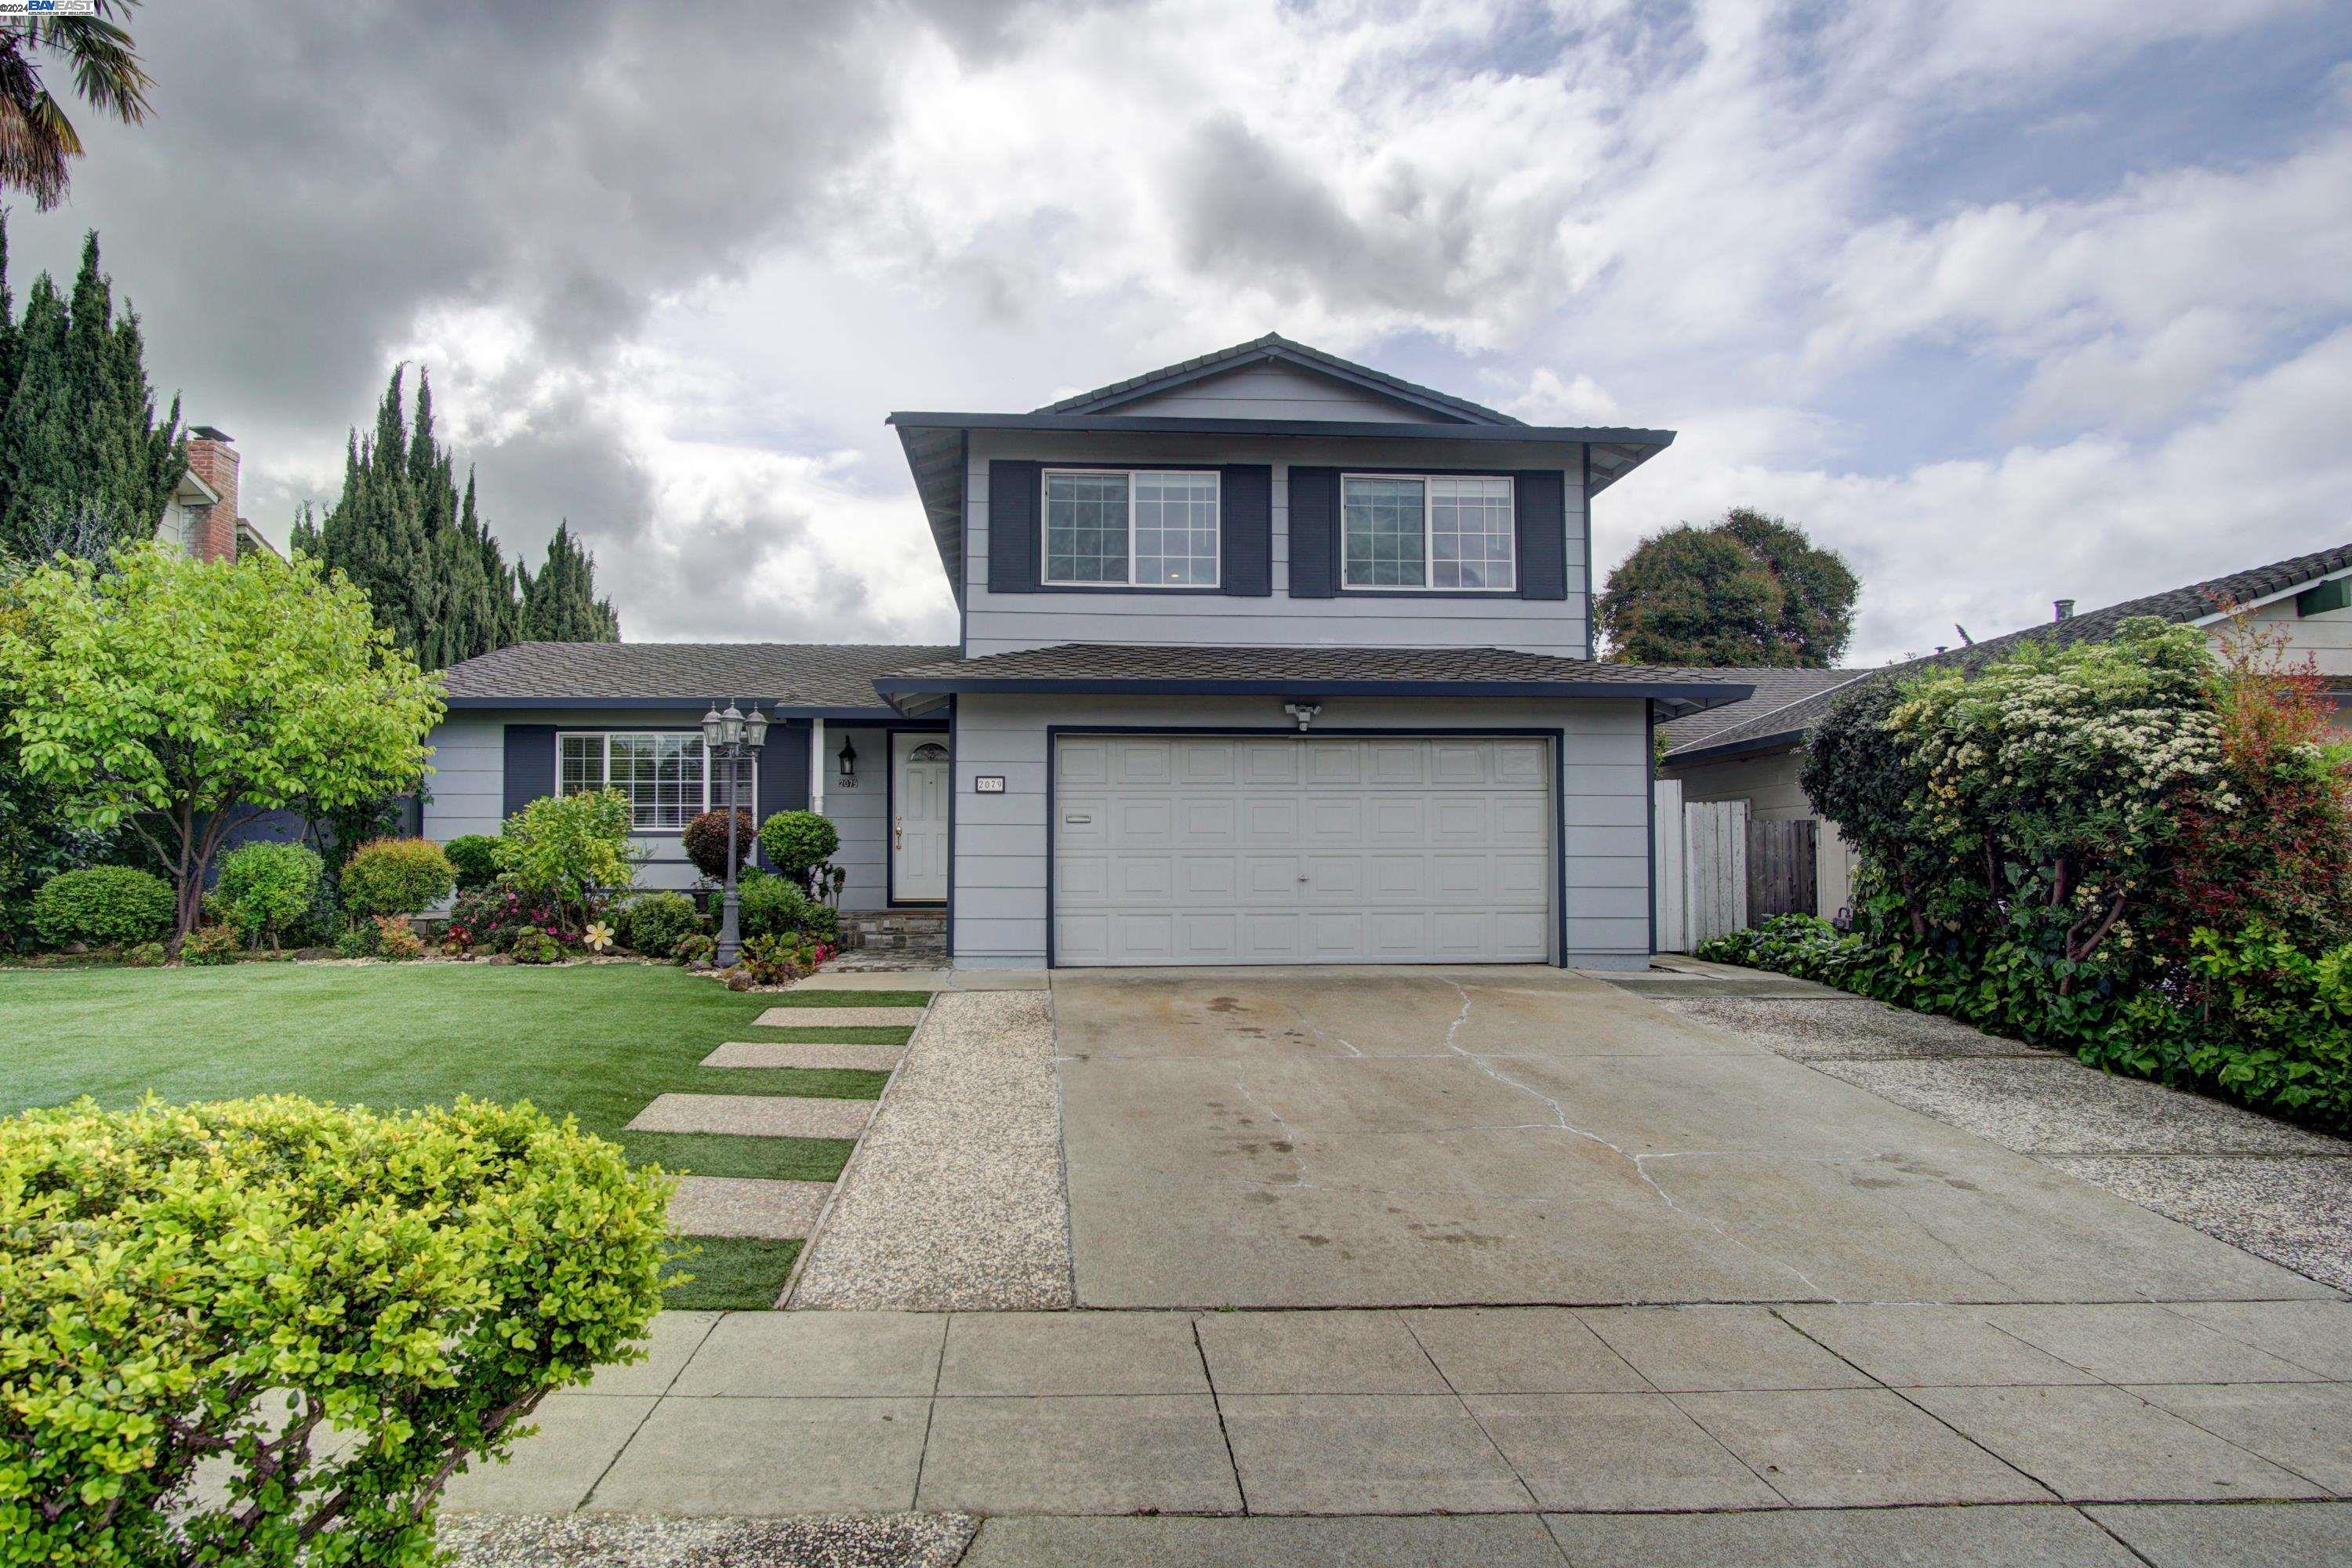 2079 Lockwood Drive, 41056455, San Jose, Detached,  for sale, Suzanne Rawlings & Maryann Butcher, REALTY EXPERTS®